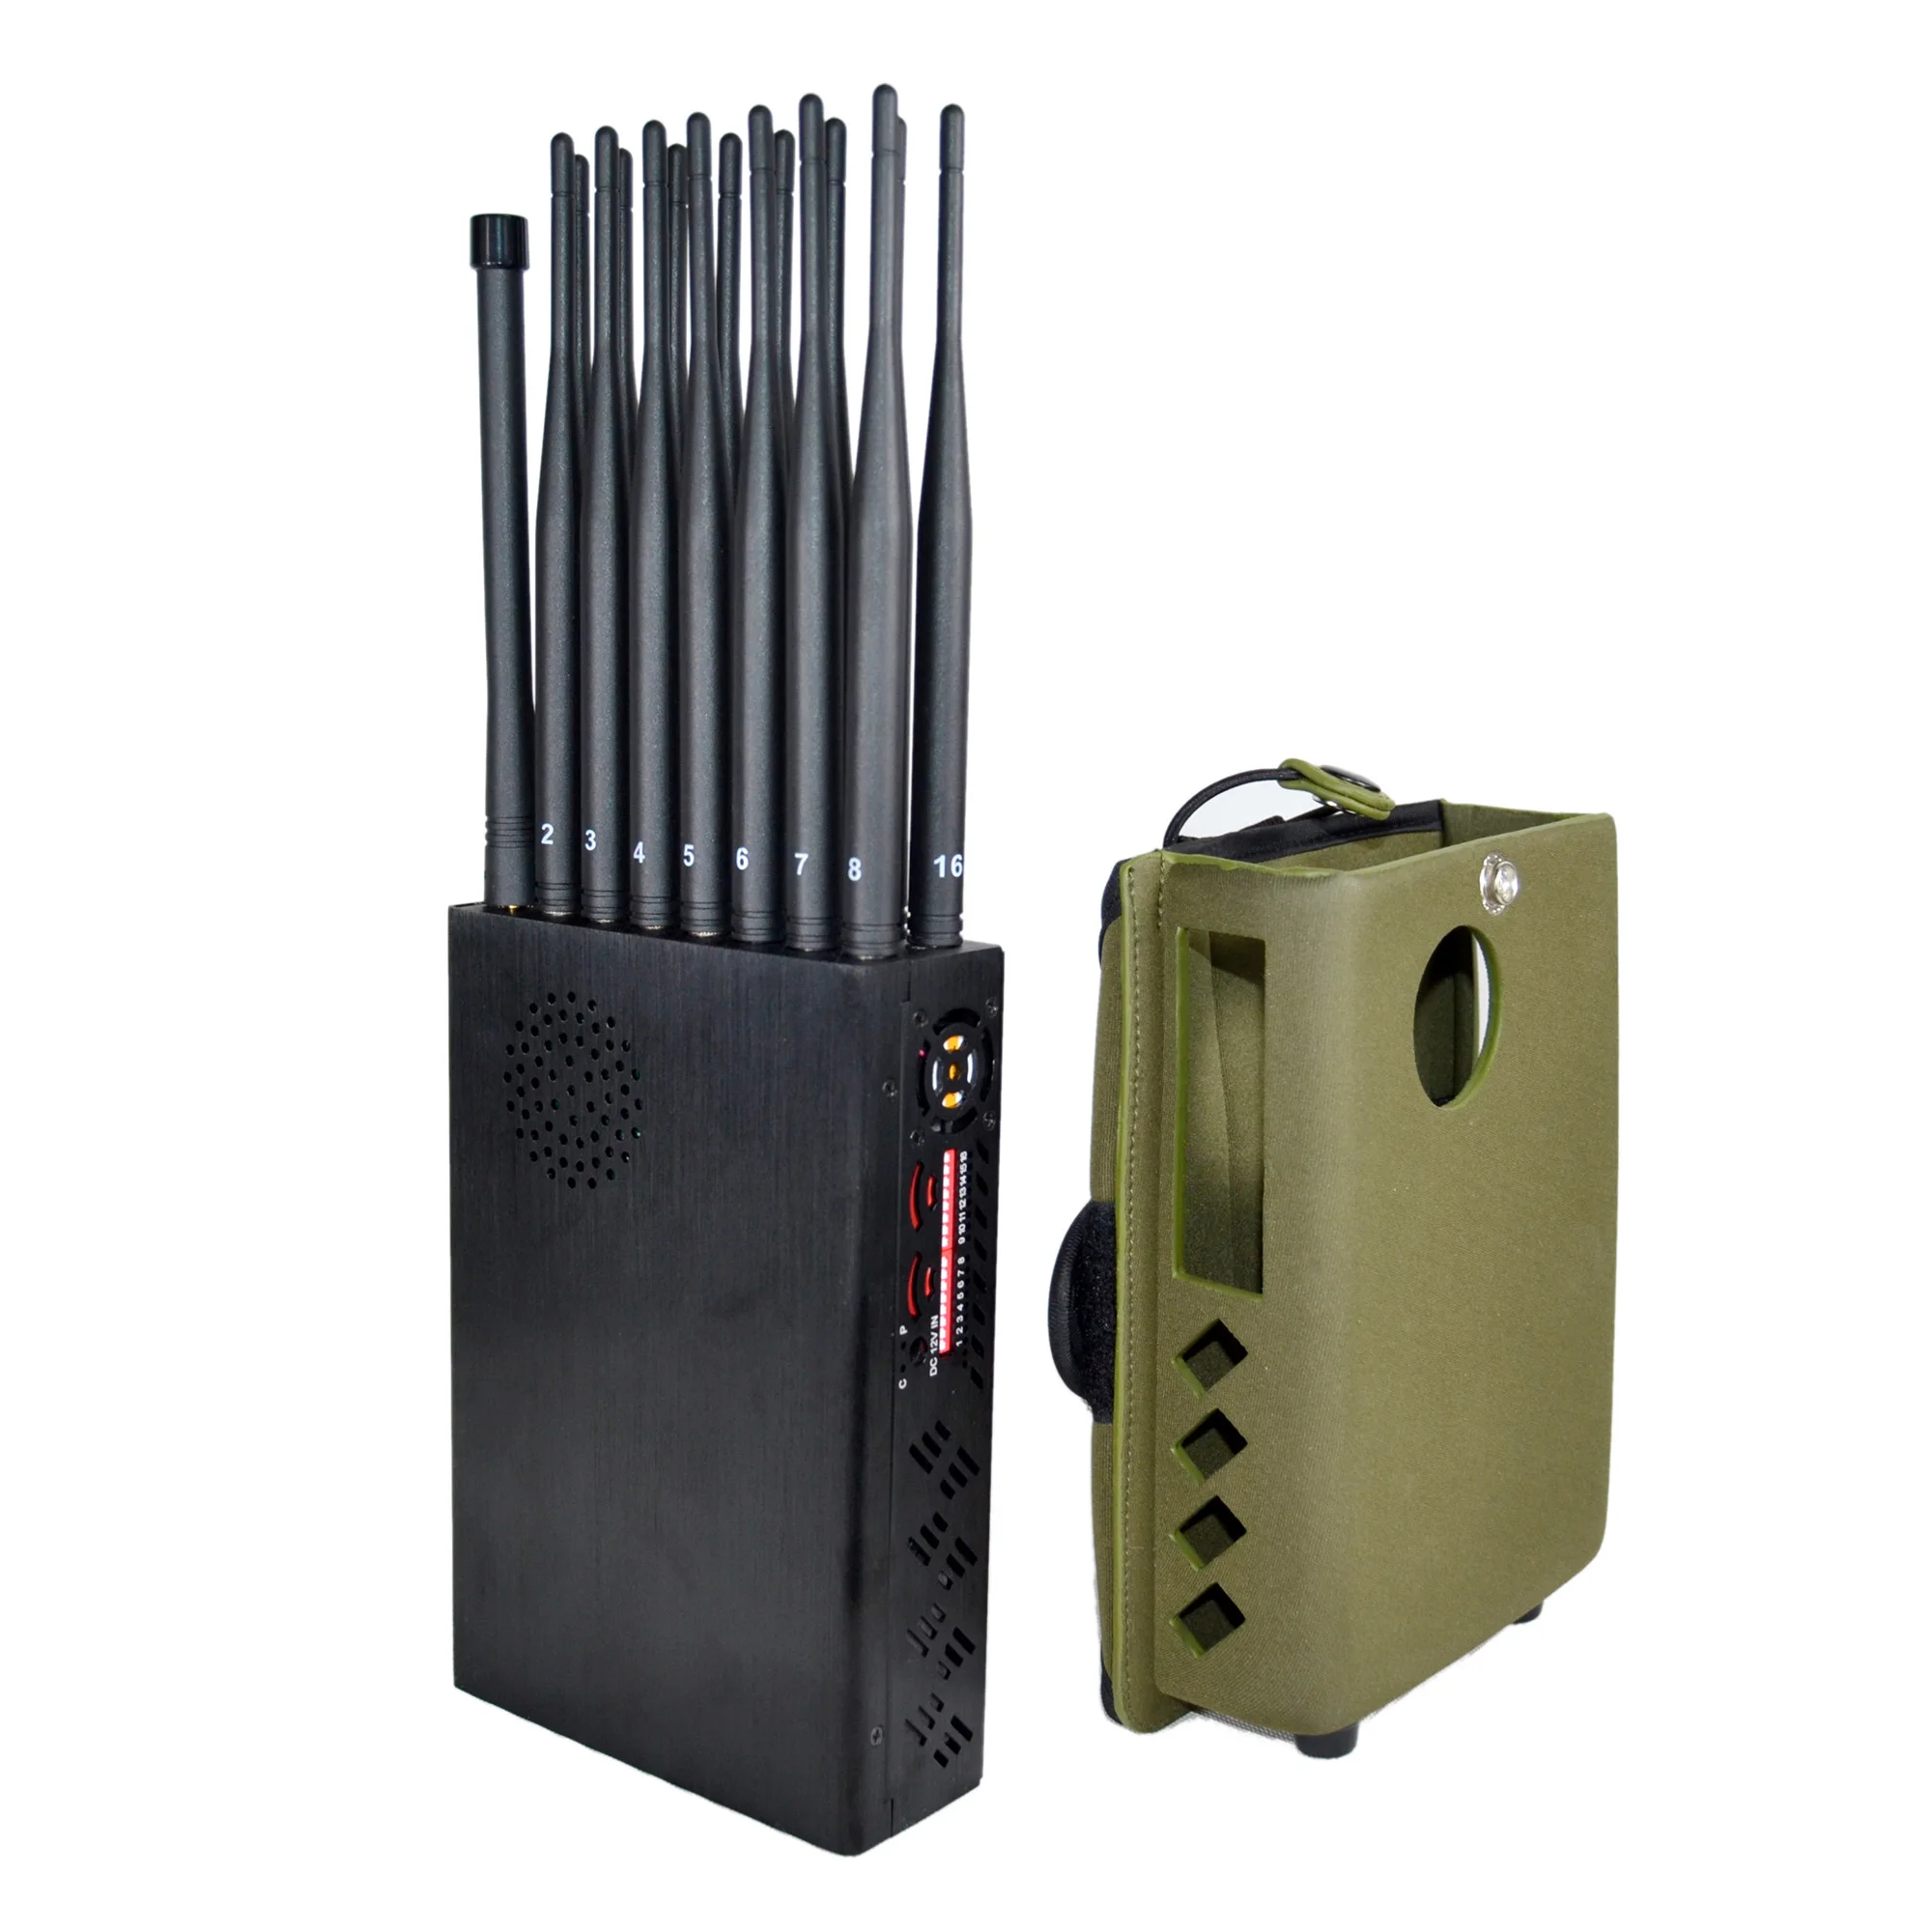 The Latest Handheld 16 Bands Cell Phone Jammer With Nylon Cover,Blocking 5G 4G Wi-Fi5G Jammer